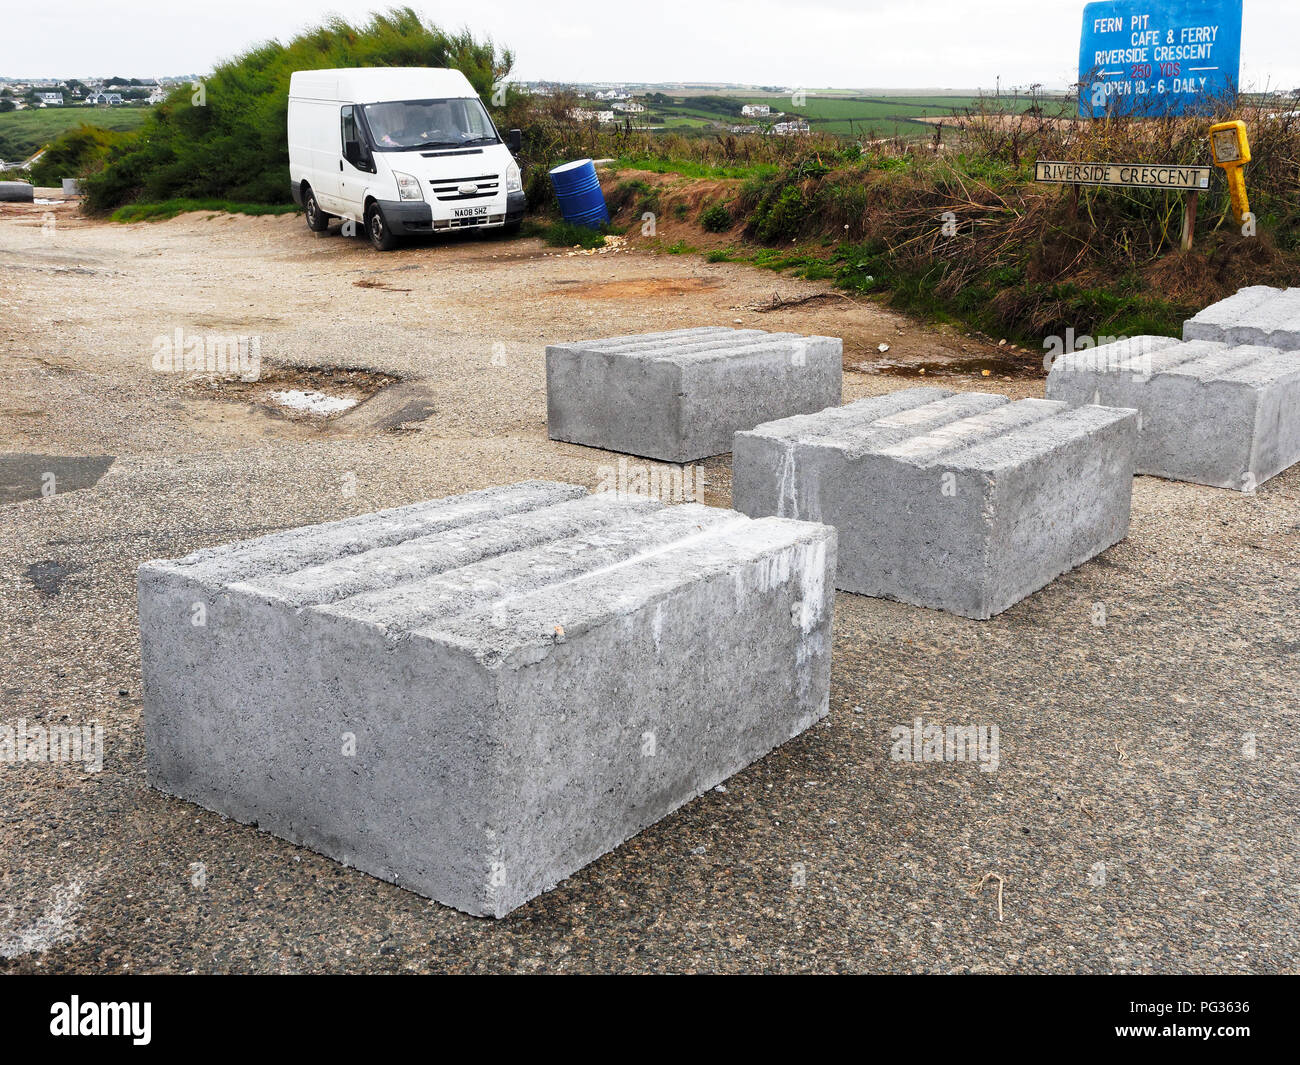 Newquay, Cornwall, UK. 23 August, 2018. Unknown Cornish Vigilantes trap a Camper Van with Concrete blocks at  Pentire Head Newquay beauty spot. The Vigilantes claim they are tired of long stay wild campers on a section of the unadopted road and have  taken  direct  action by sealing a section of the road against access with concrete blocks. Lack of official action over the years  prompted the action. Both Police and Cornwall Council  say their hands are tied on any action in response as this is private ground. Local opinion is divided.  August,23rd,2018 Credit: Robert Taylor/Alamy Live News Stock Photo